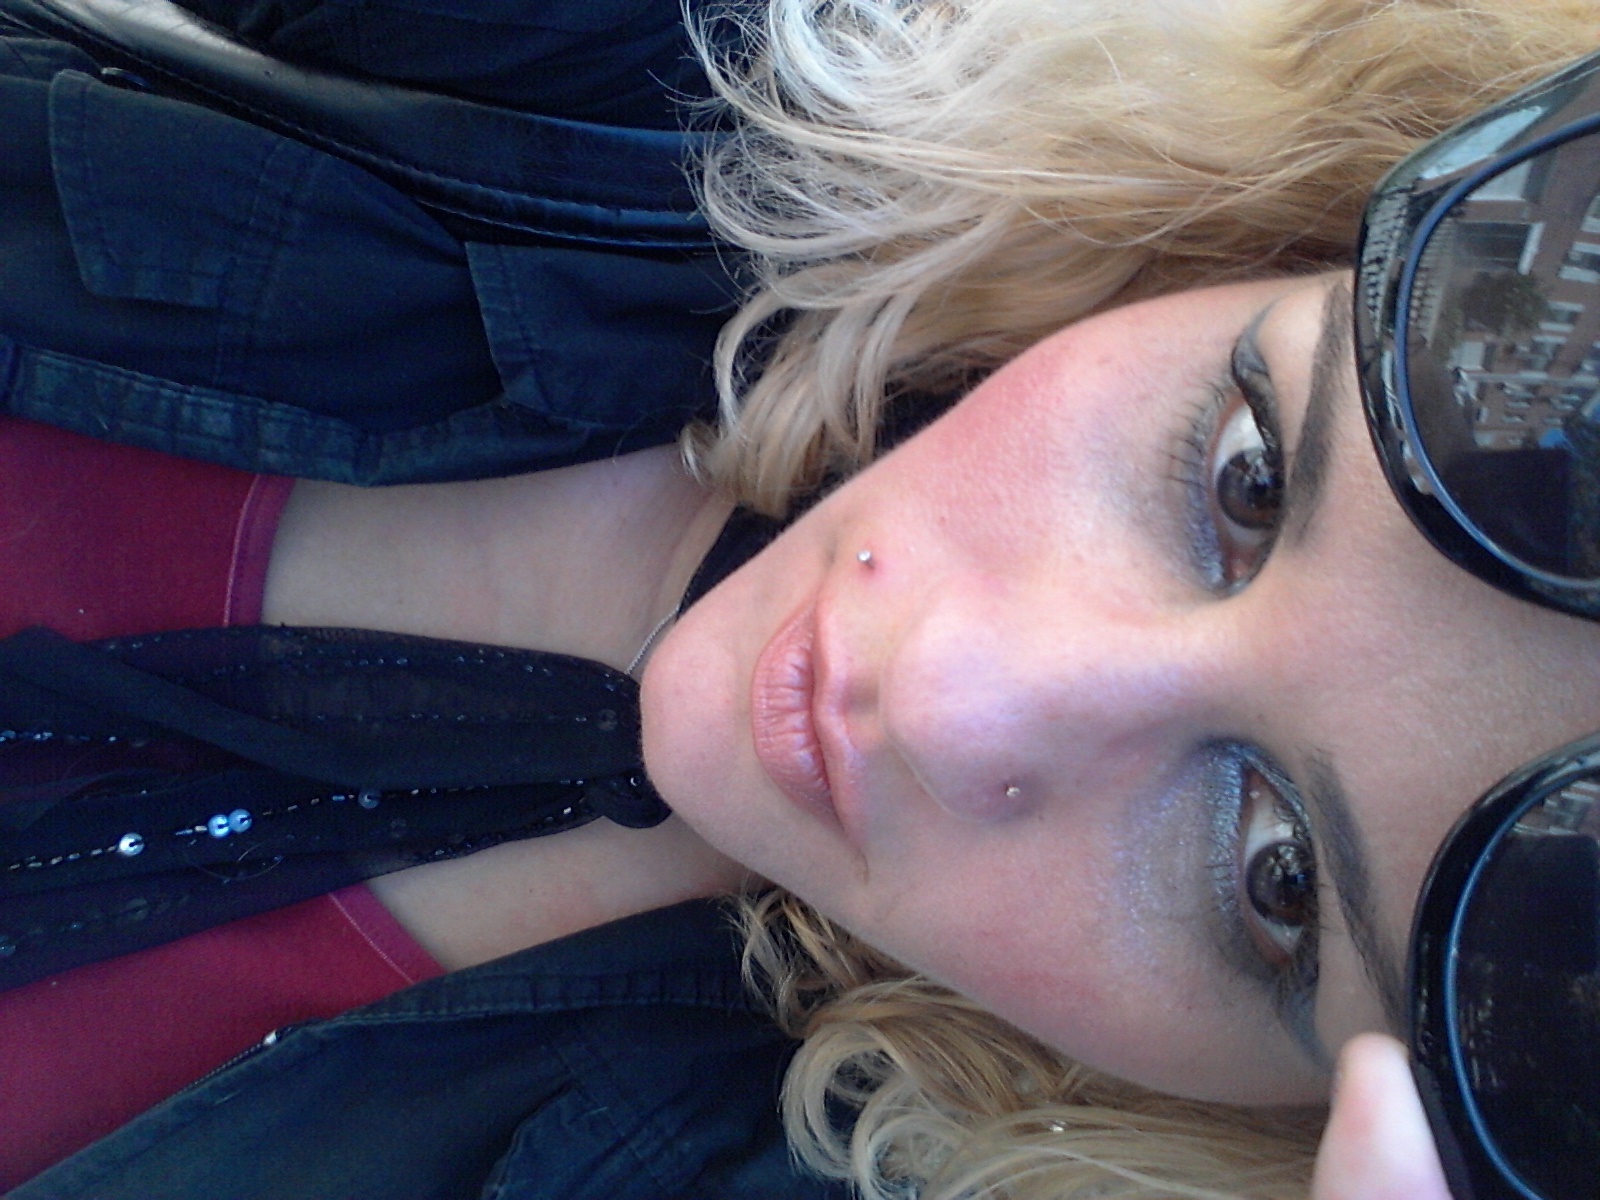 Beth Katehis with Monroe Piercing and Nose Piercing at NYC INK! By Sam